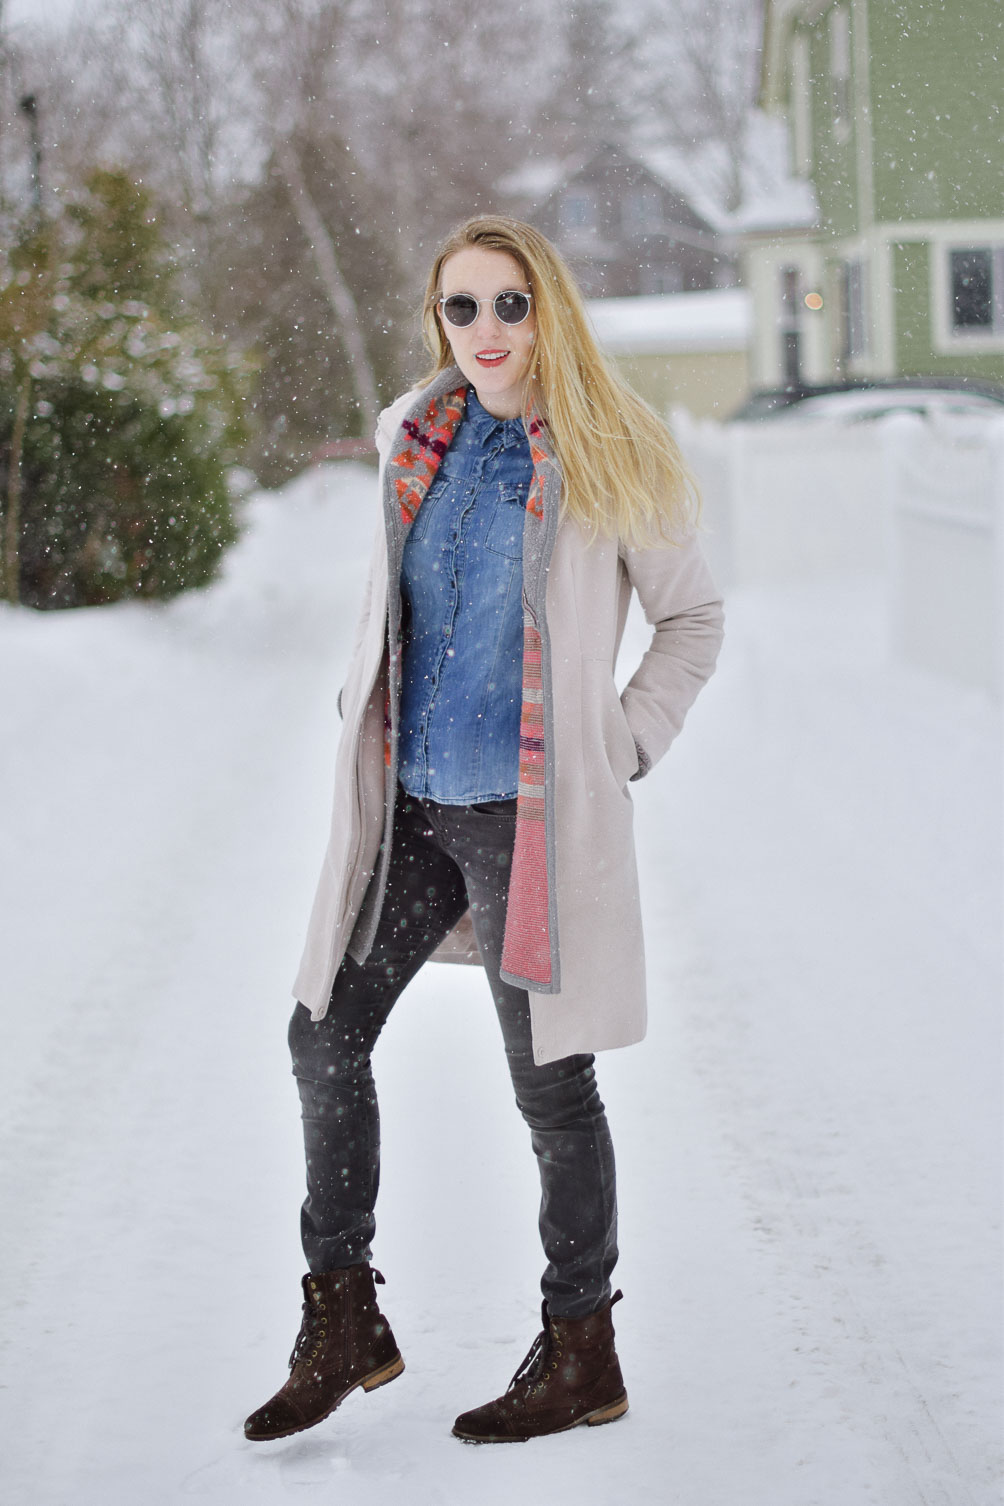 styling this cozy winter look with an aztec print sweater, chambray shirt, gray skinny jeans, and brown boots